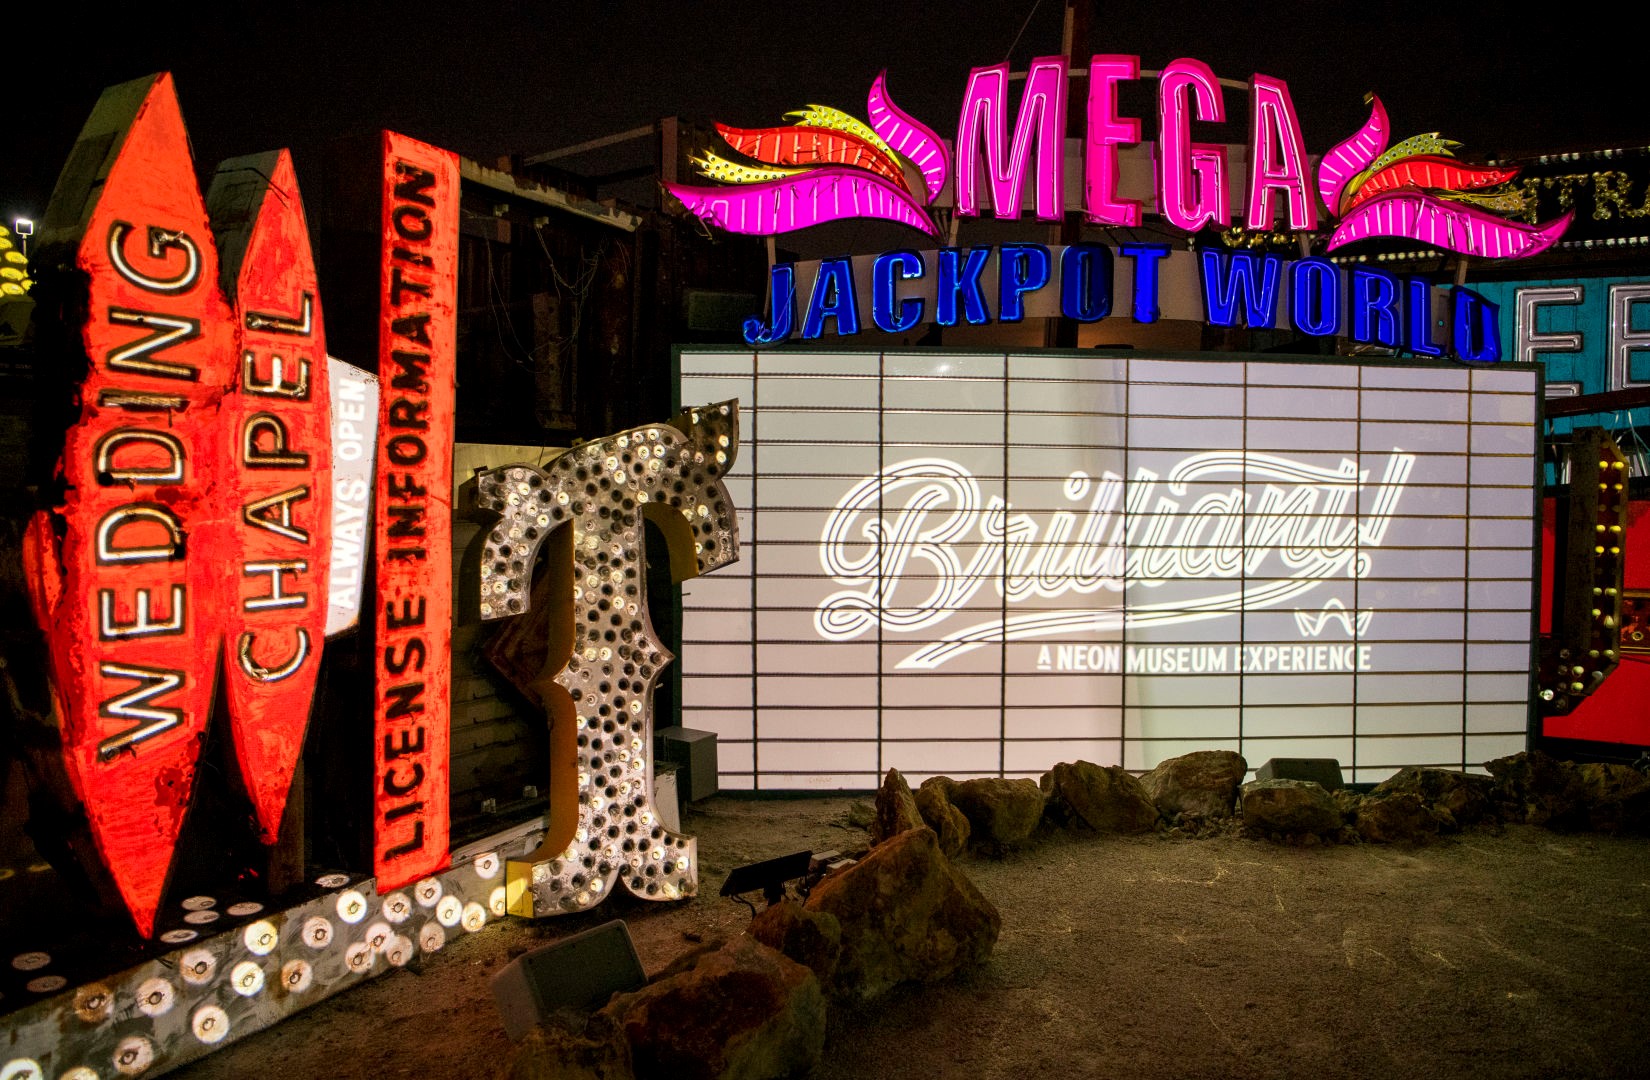 'Brilliant!'  features digital projection recreations of the lighting on some of Las Vegas' most famous neon signs